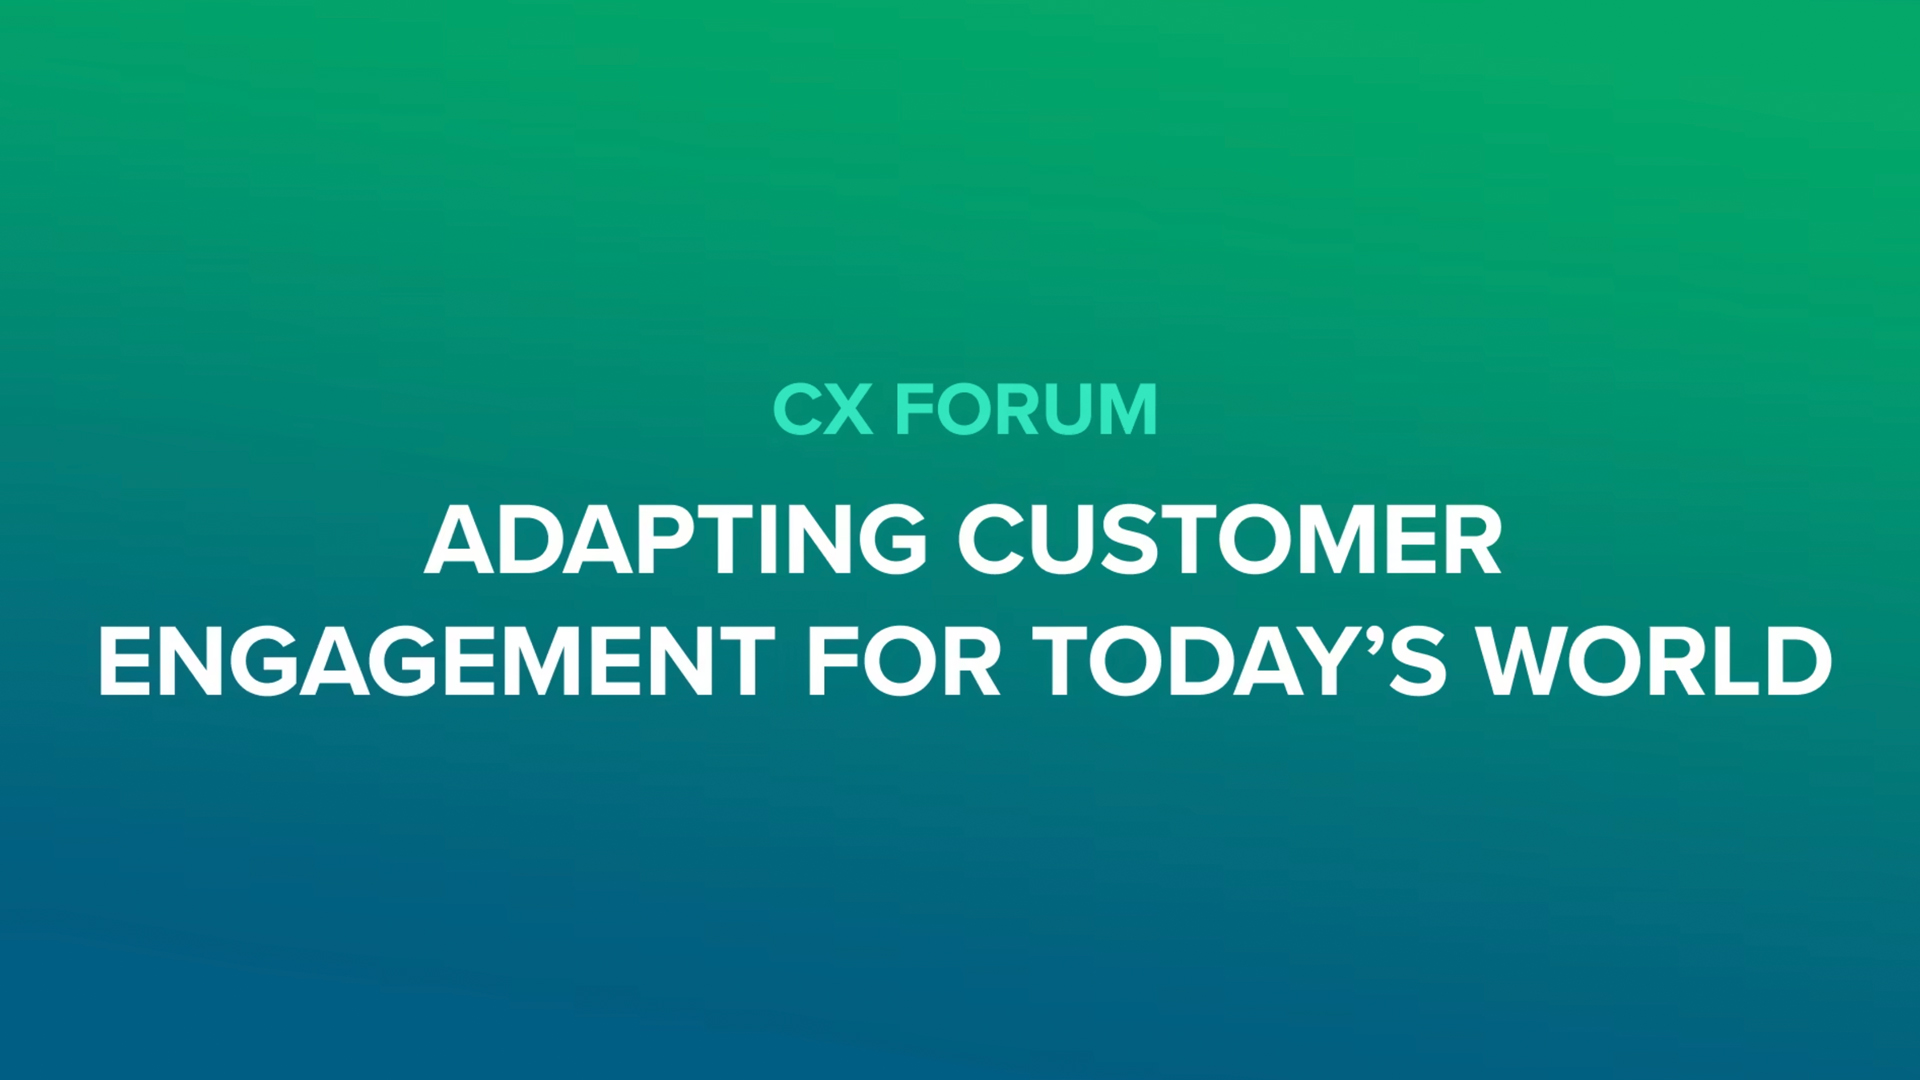 CX Forum - Adapting Customer Engagement for Today's World